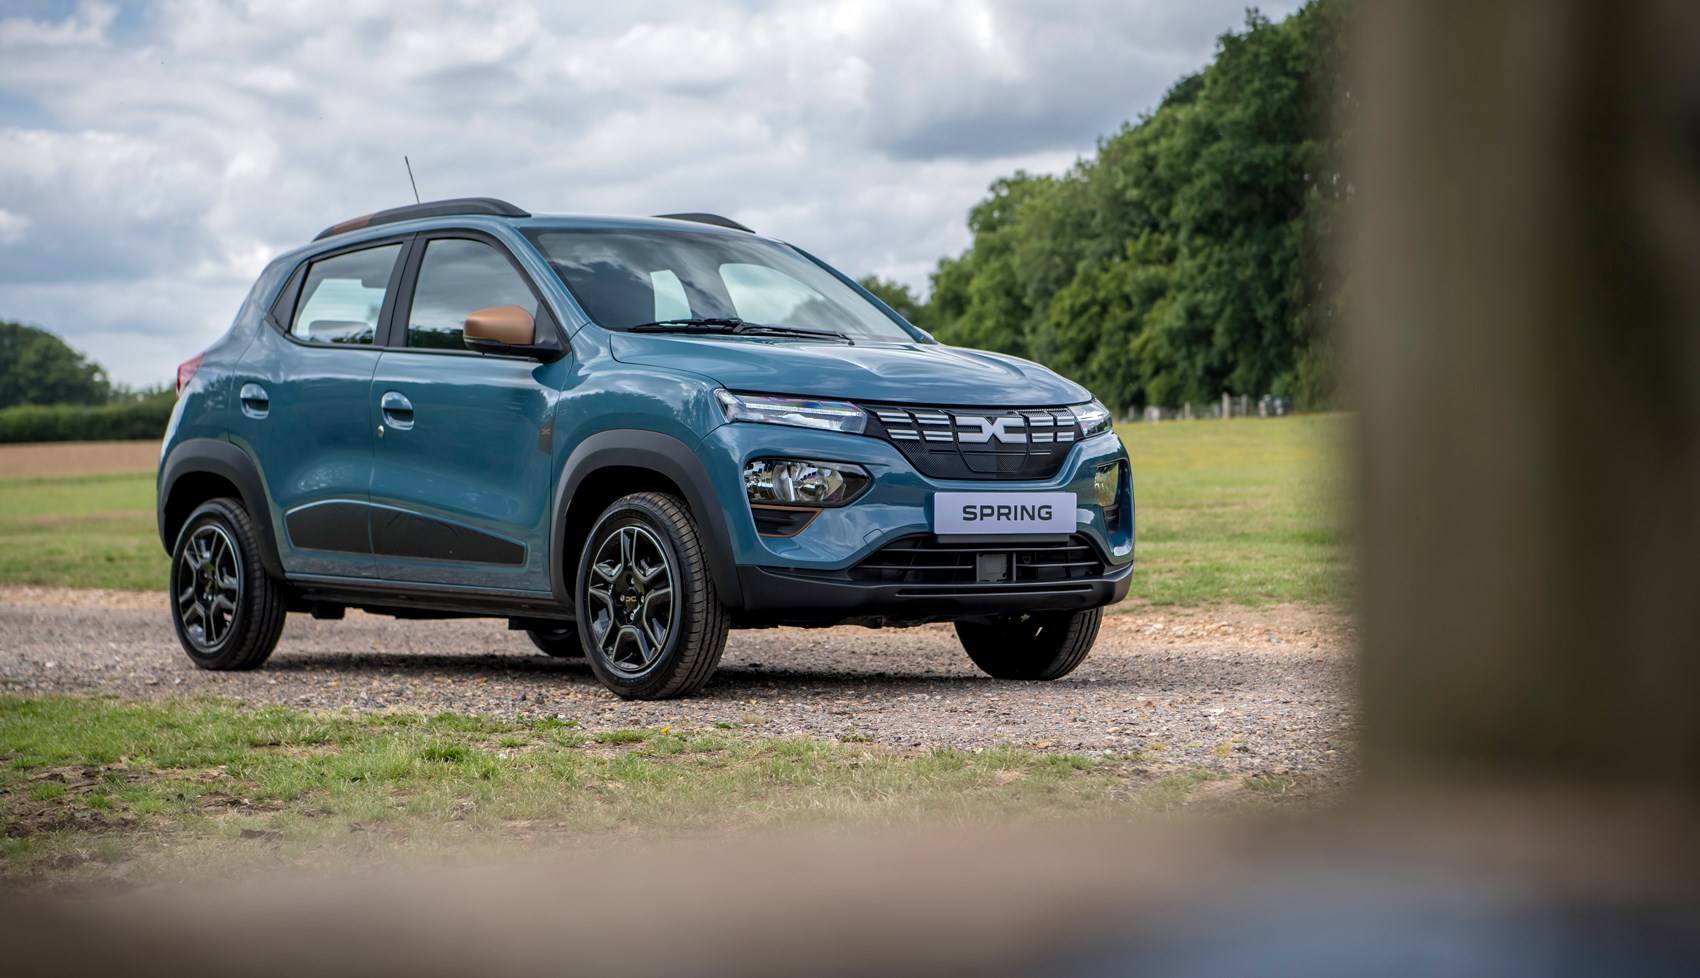 Dacia Spring could finally come to the UK according to brand boss